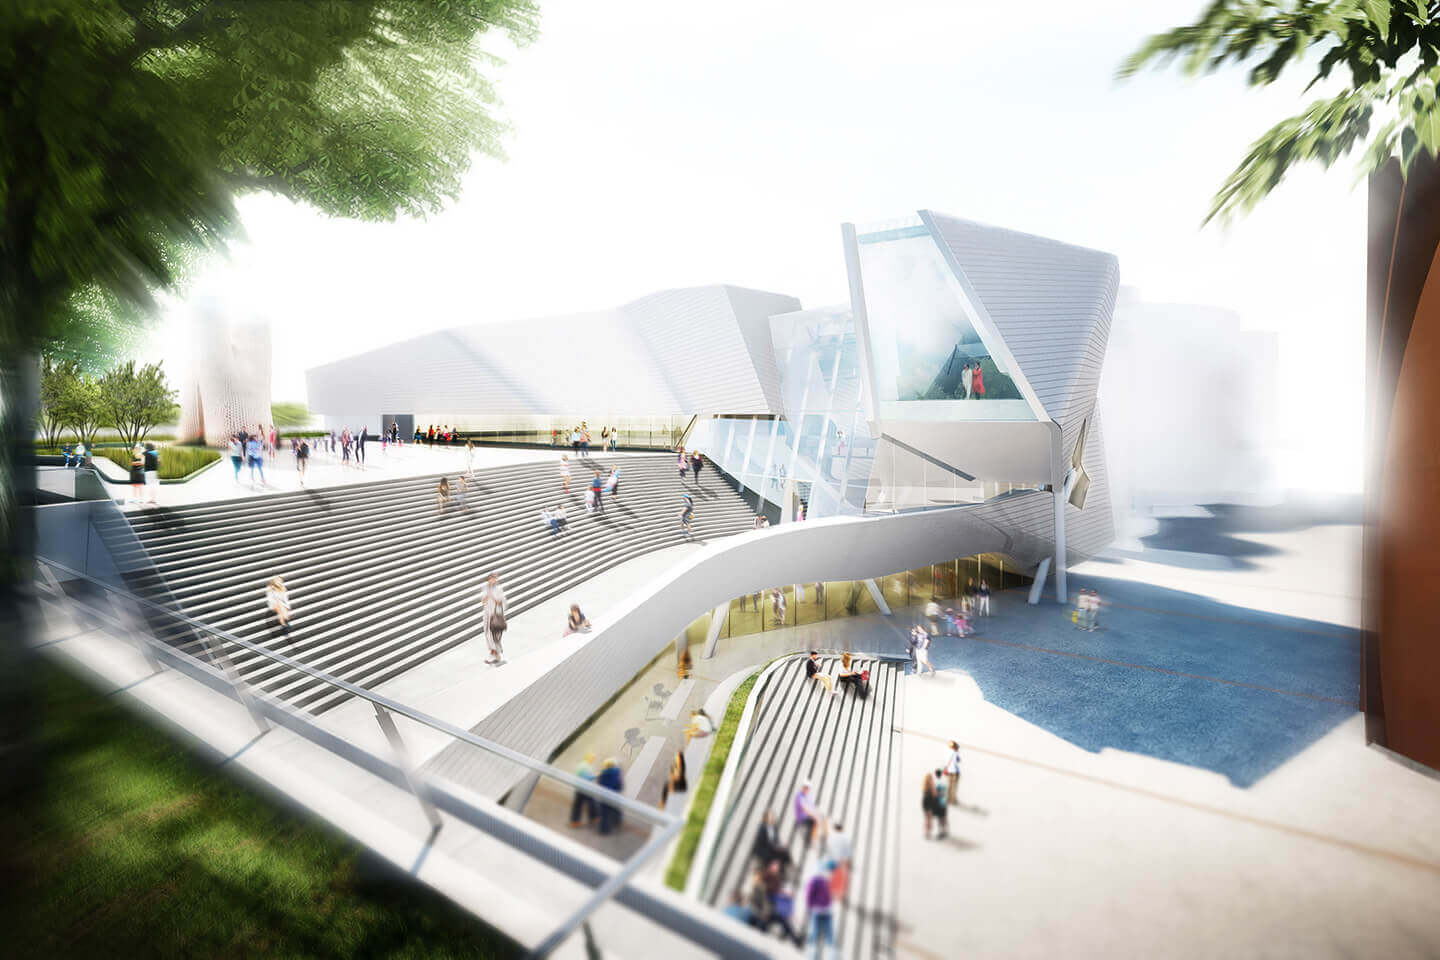 Rendering of the Orange County Museum of Art project from the exterior stair